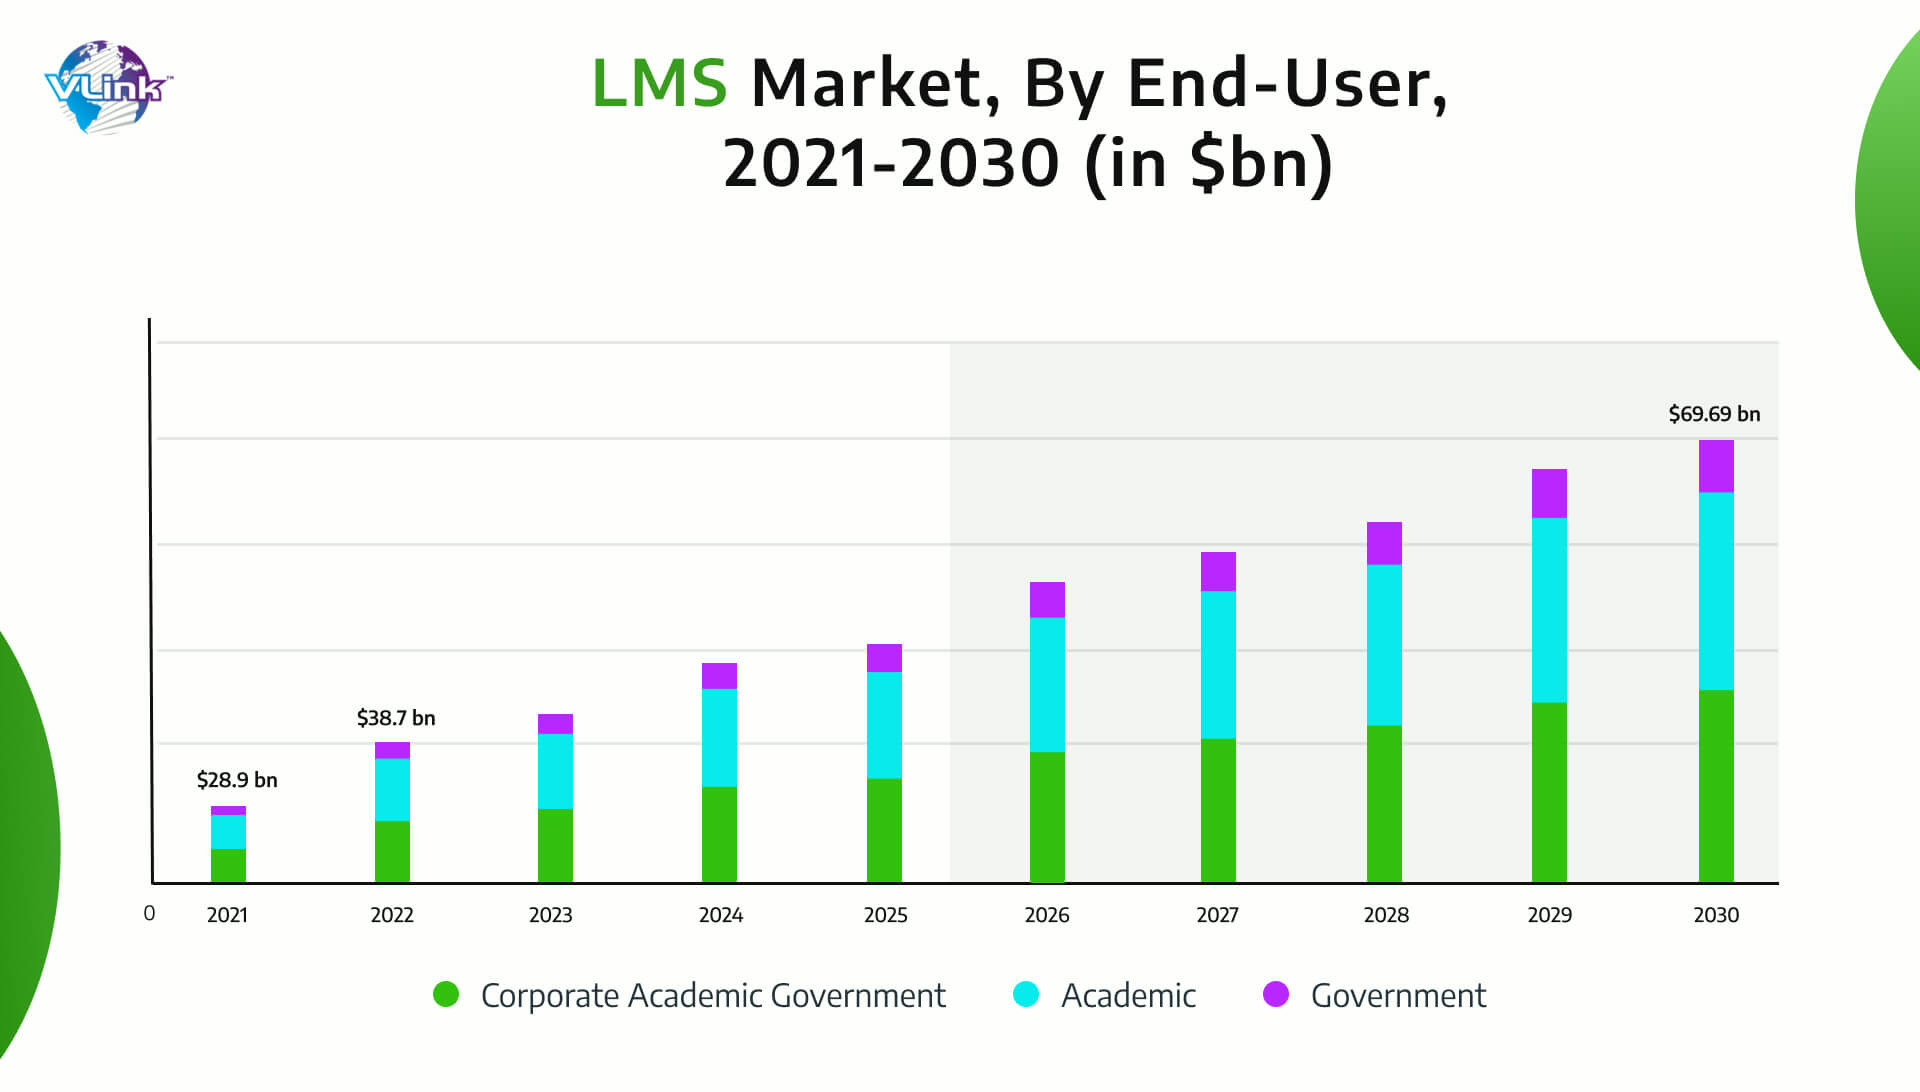 LMS market by end user 2021-2030